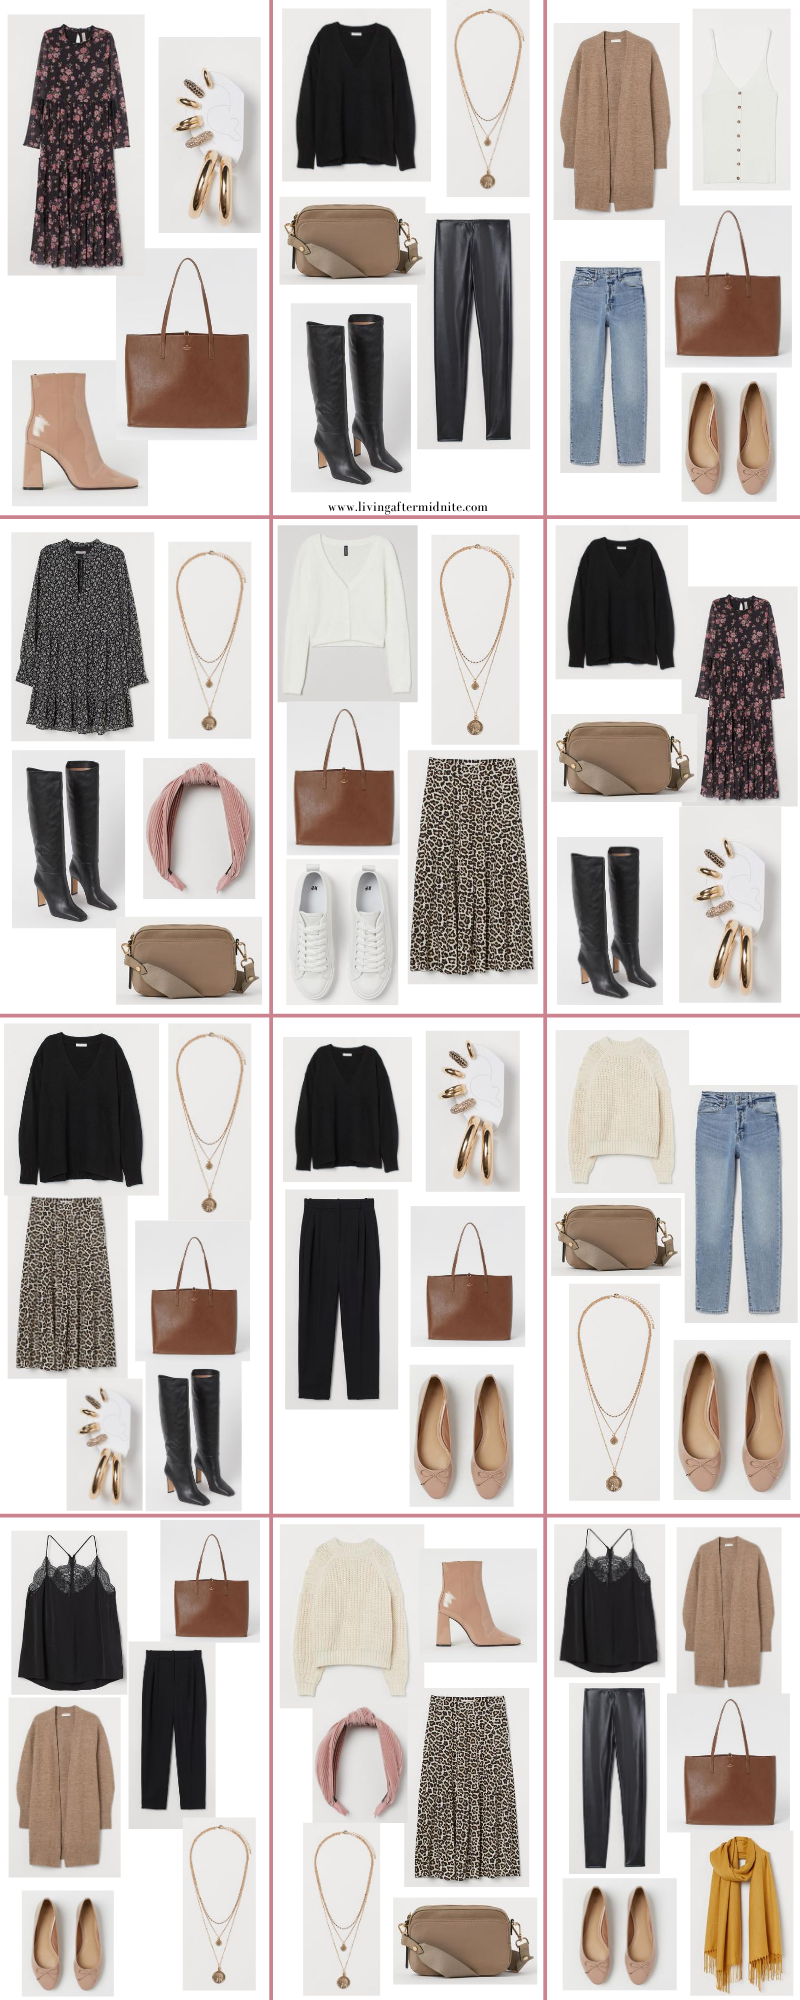 26 Basic and Extremely Versatile H&M Fall Capsule Wardrobes